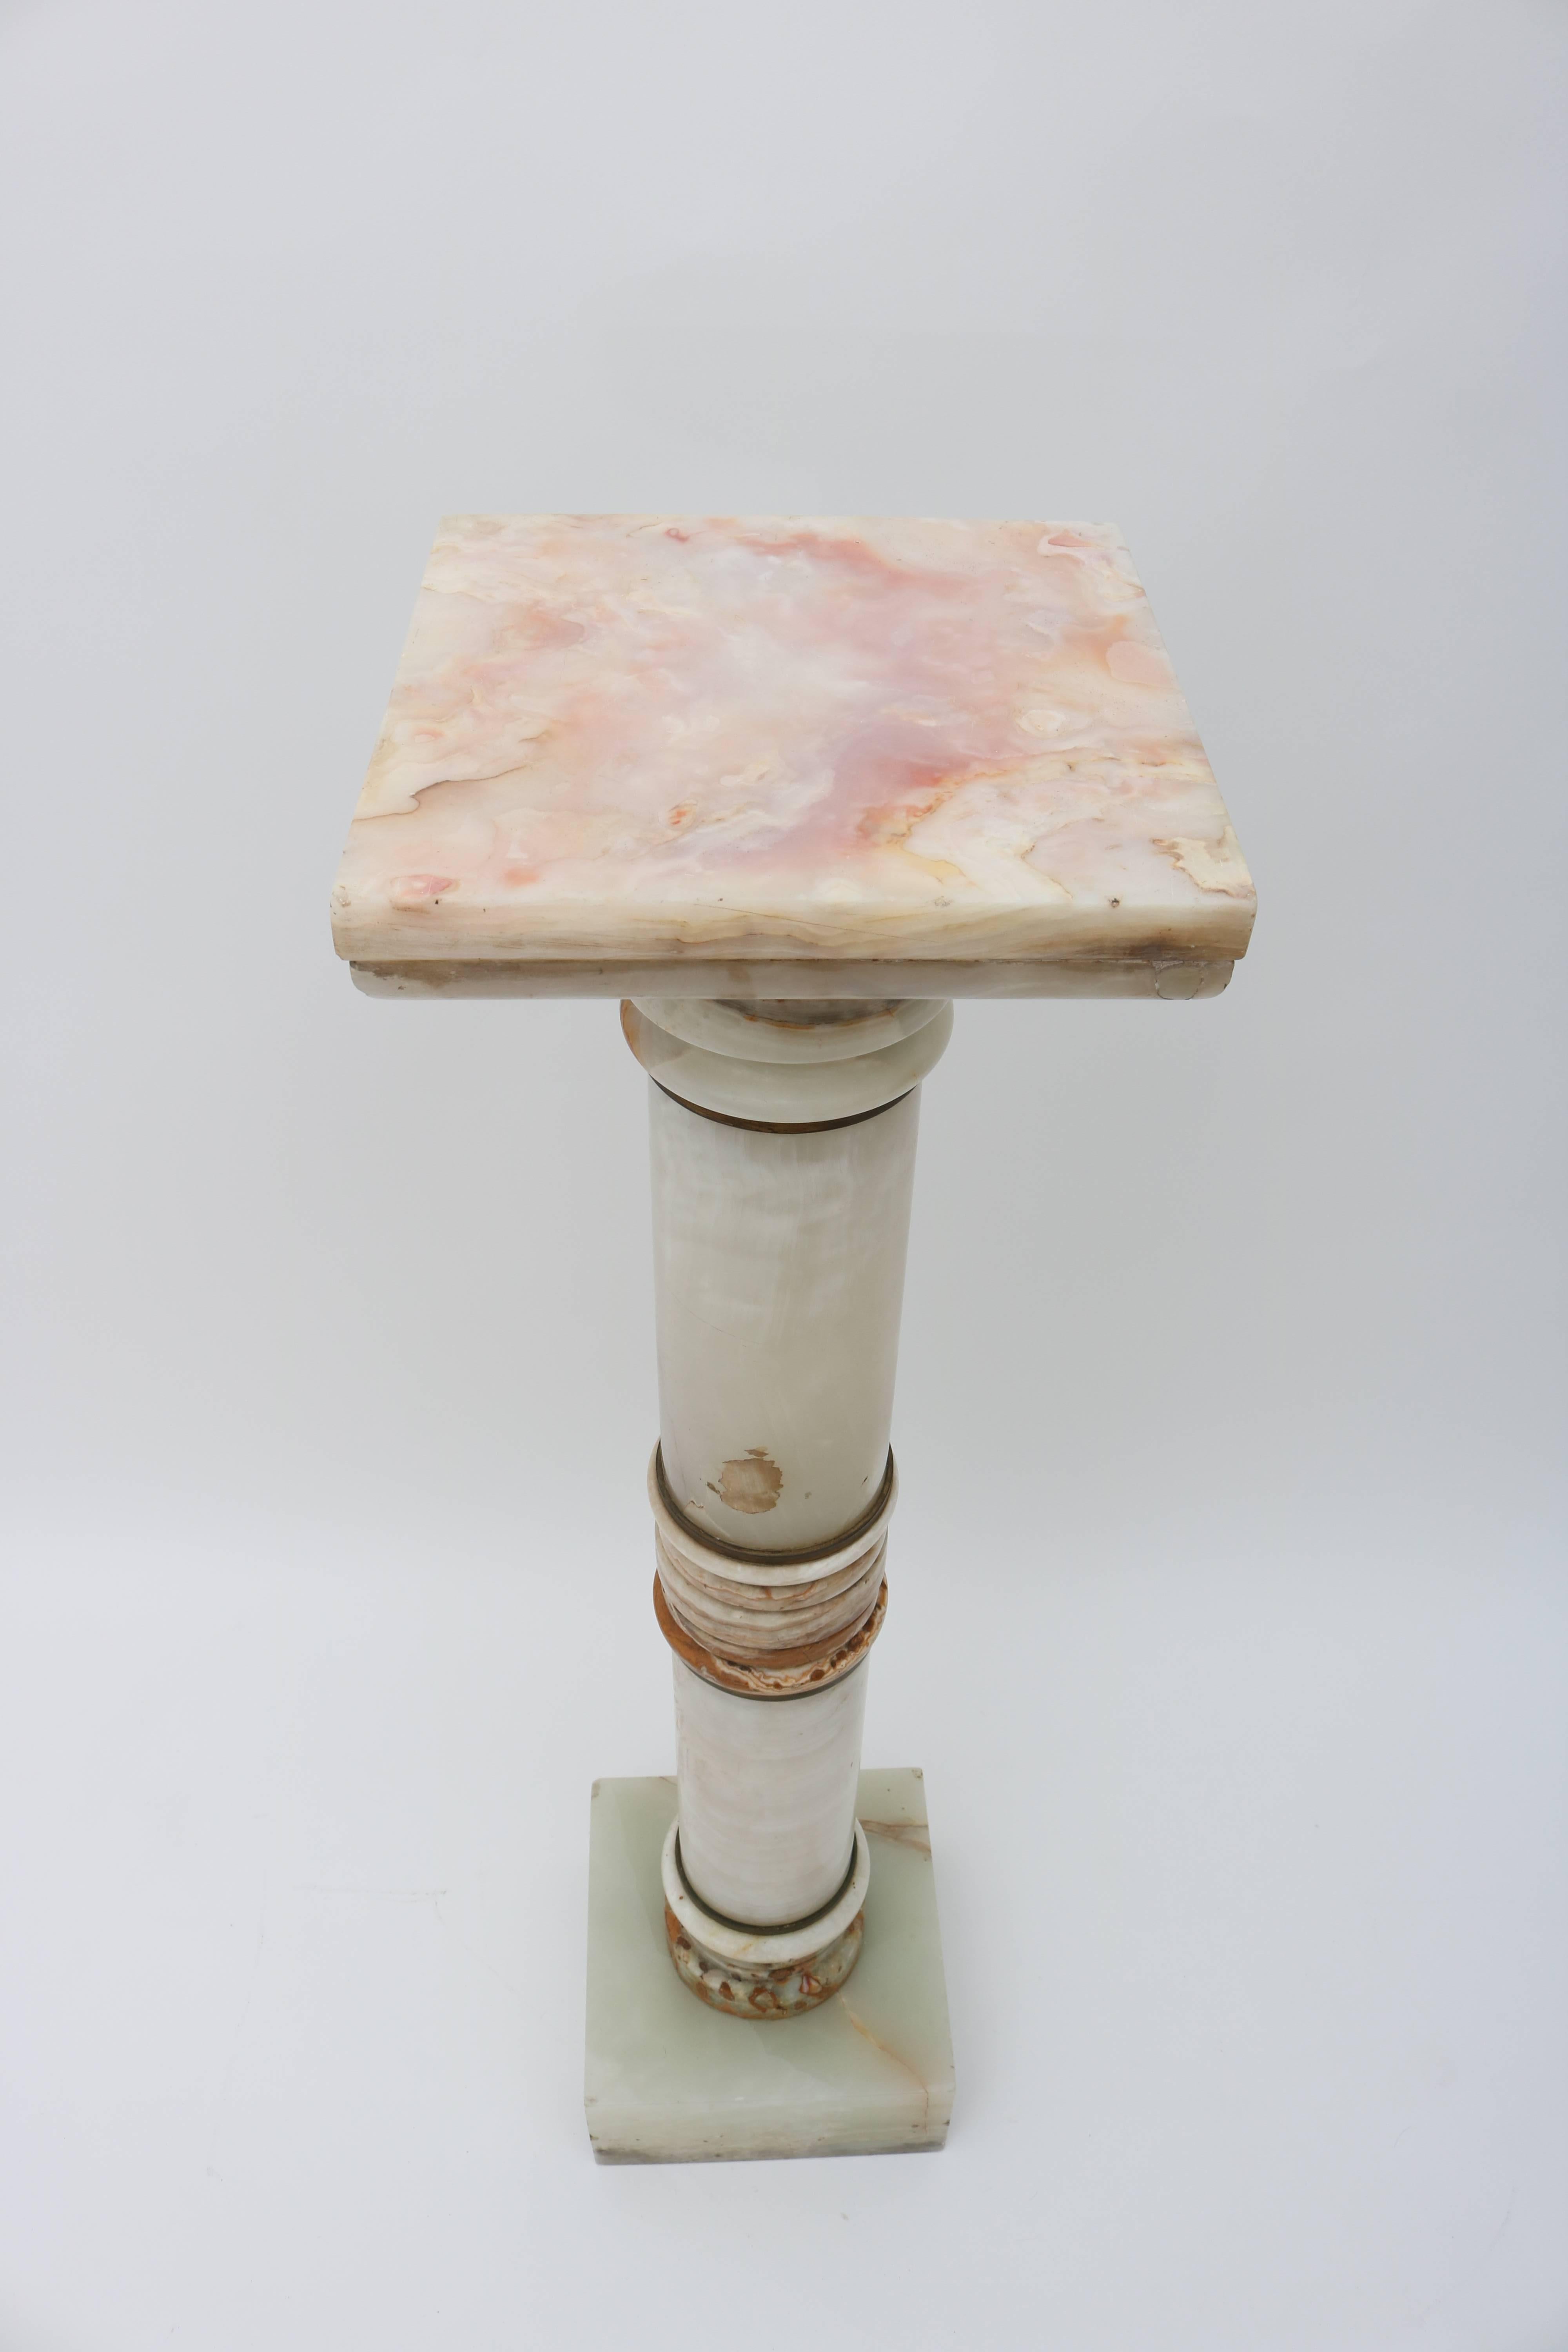 This onyx and bronze pedestal will work beautifully to display a classical bronze or perhaps a potted orchid.

Note: Bronze has aged to an antique finish.

For best net trade price or additional questions regarding this item, please click the